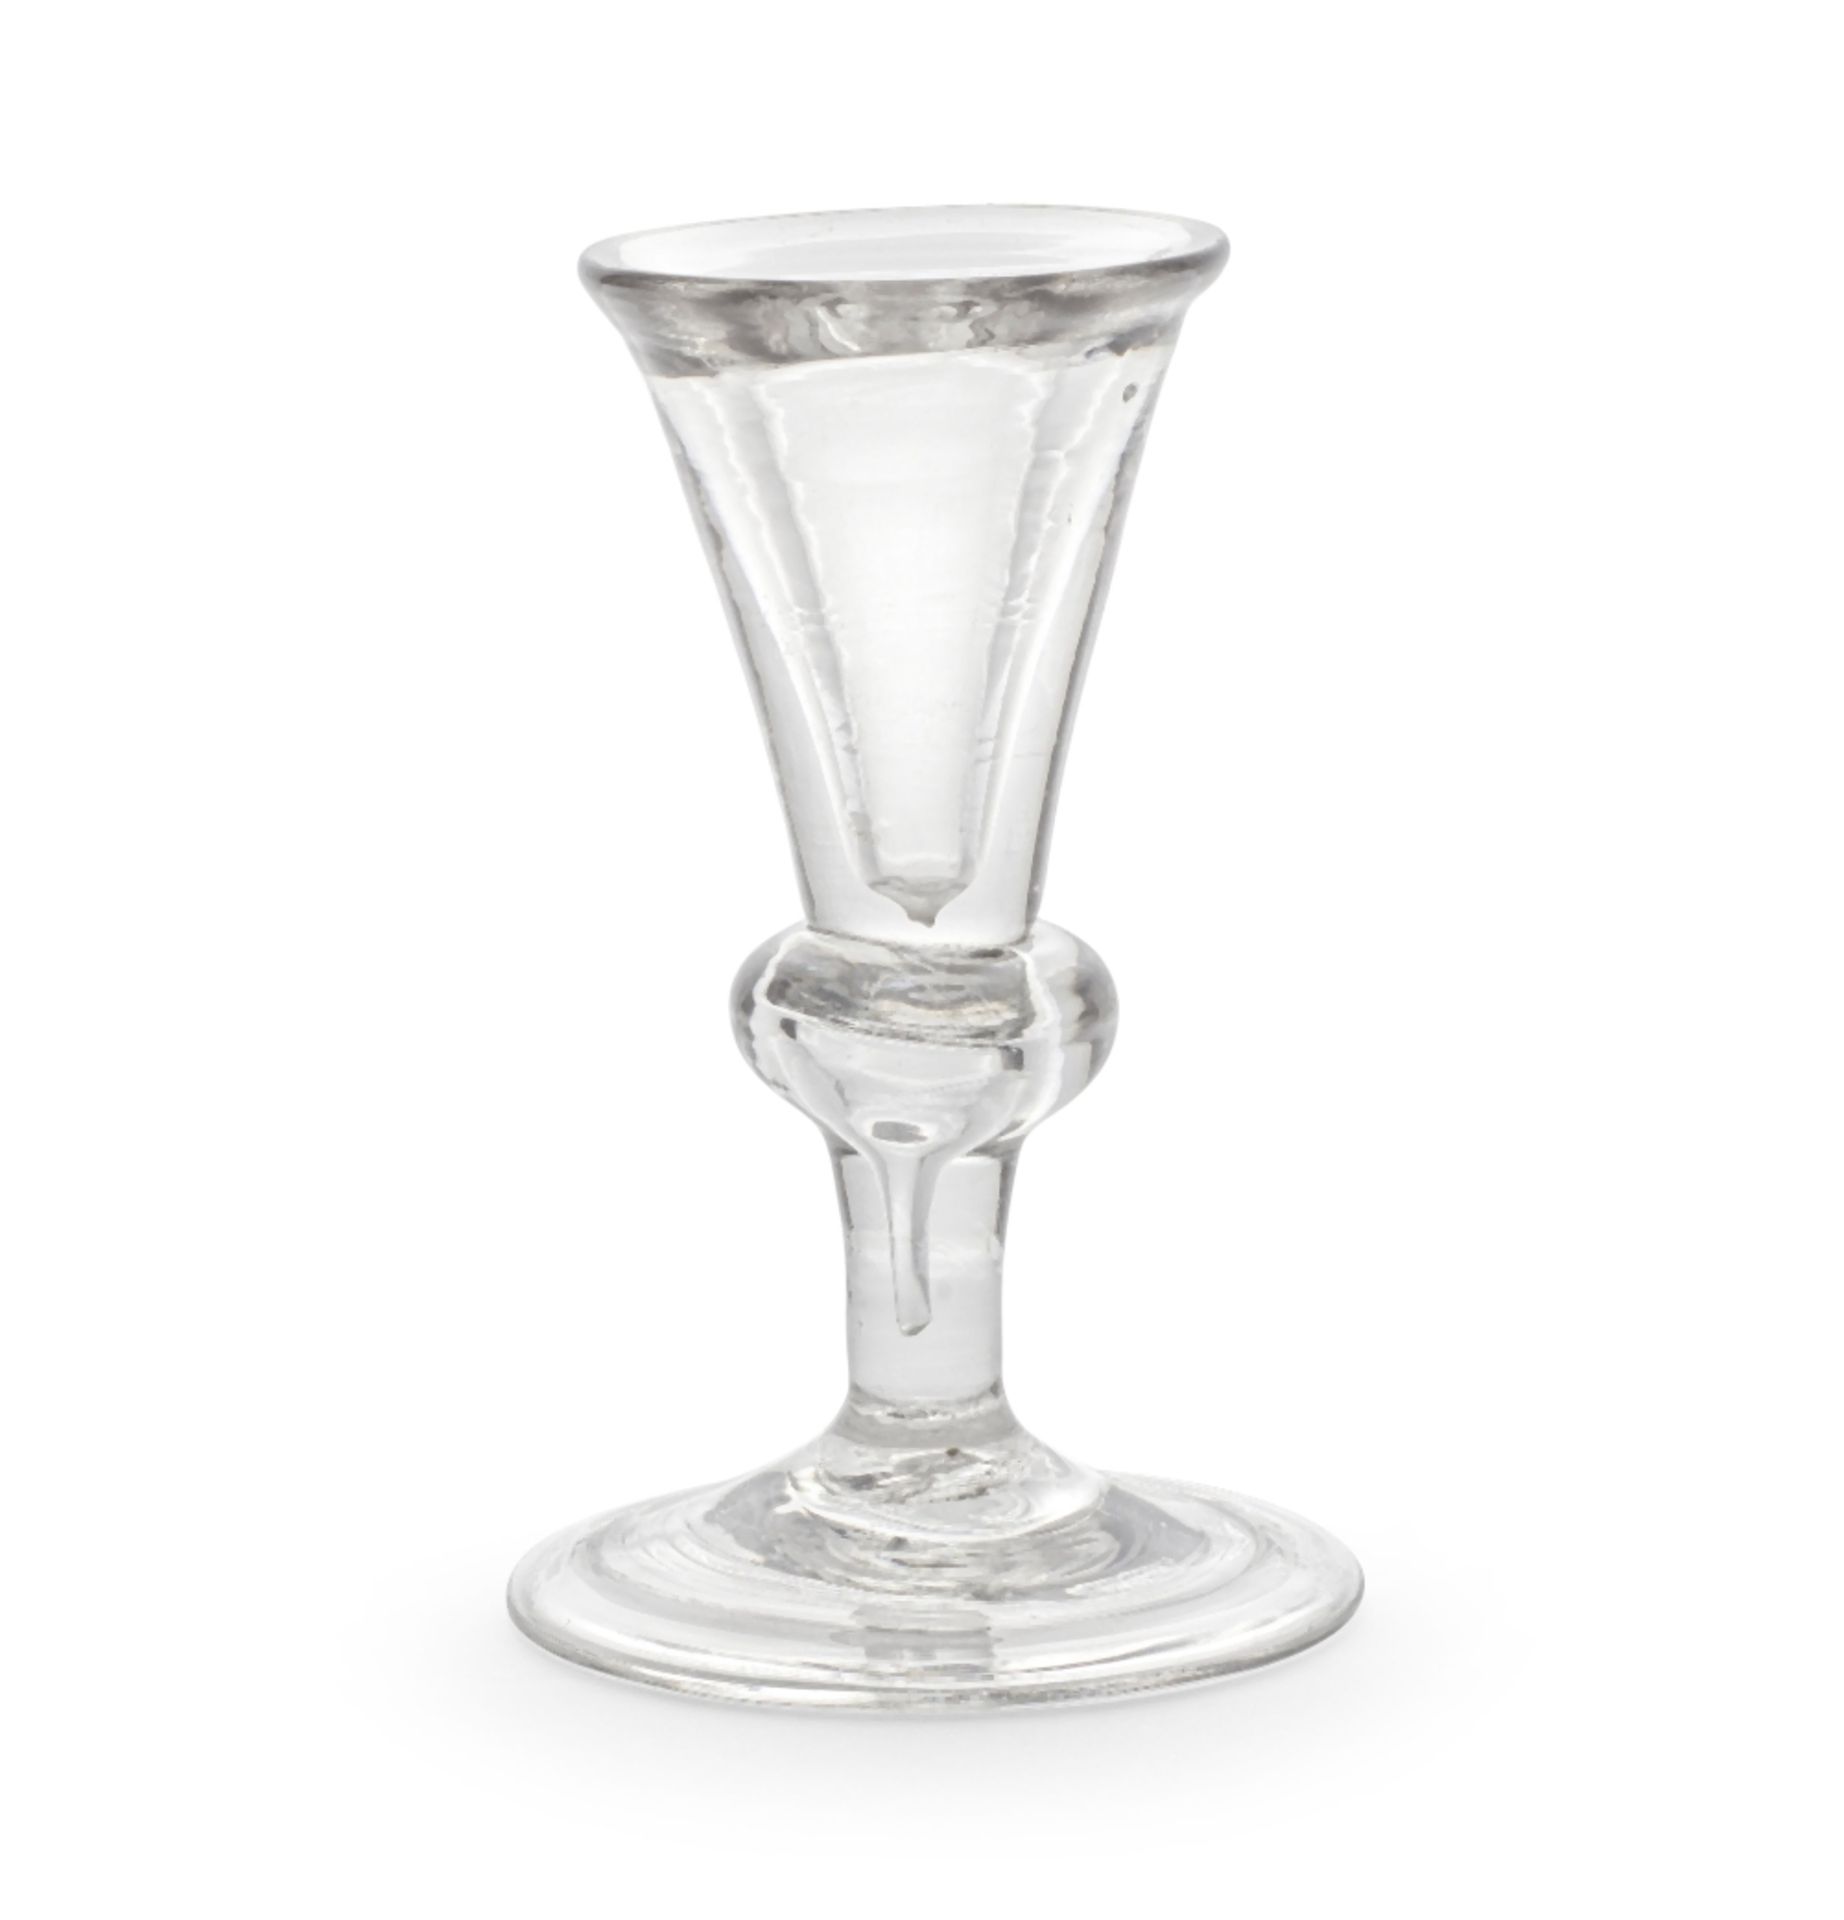 A deceptive baluster wine or toastmaster's glass, circa 1725-30